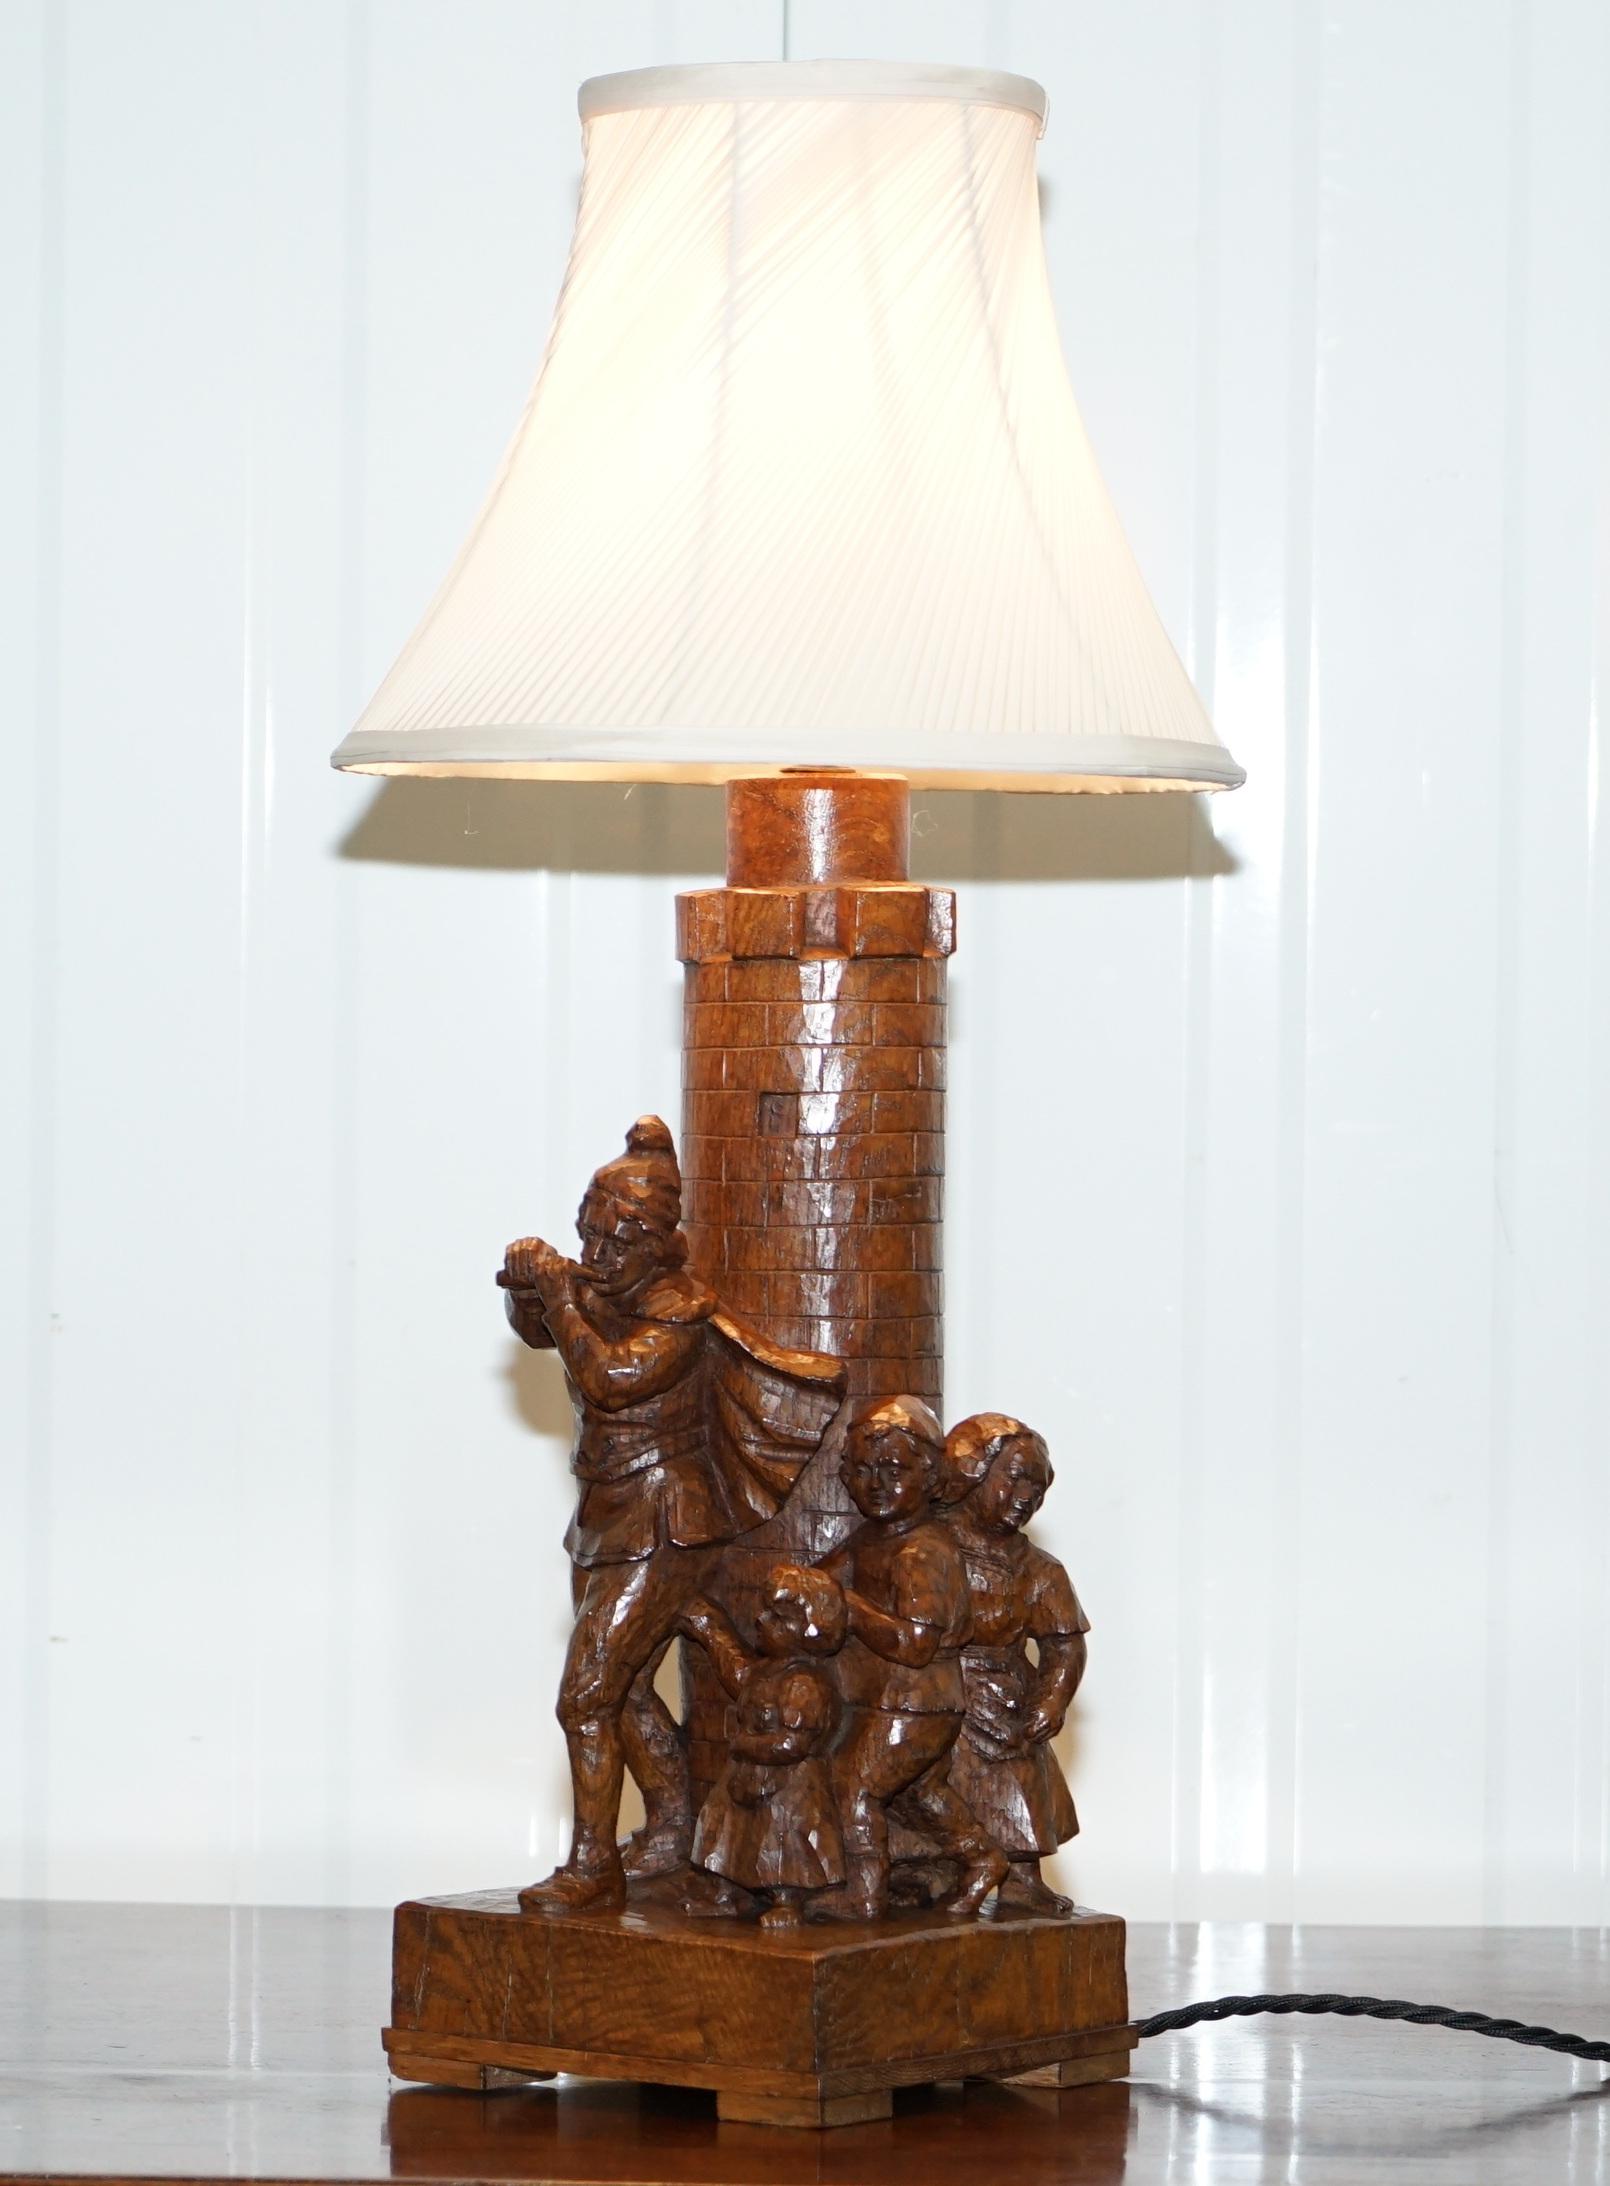 Hand-Carved Rare Pied Piper of Hamelin Black Forest Carved Wood Arts & Crafts Table Lamp